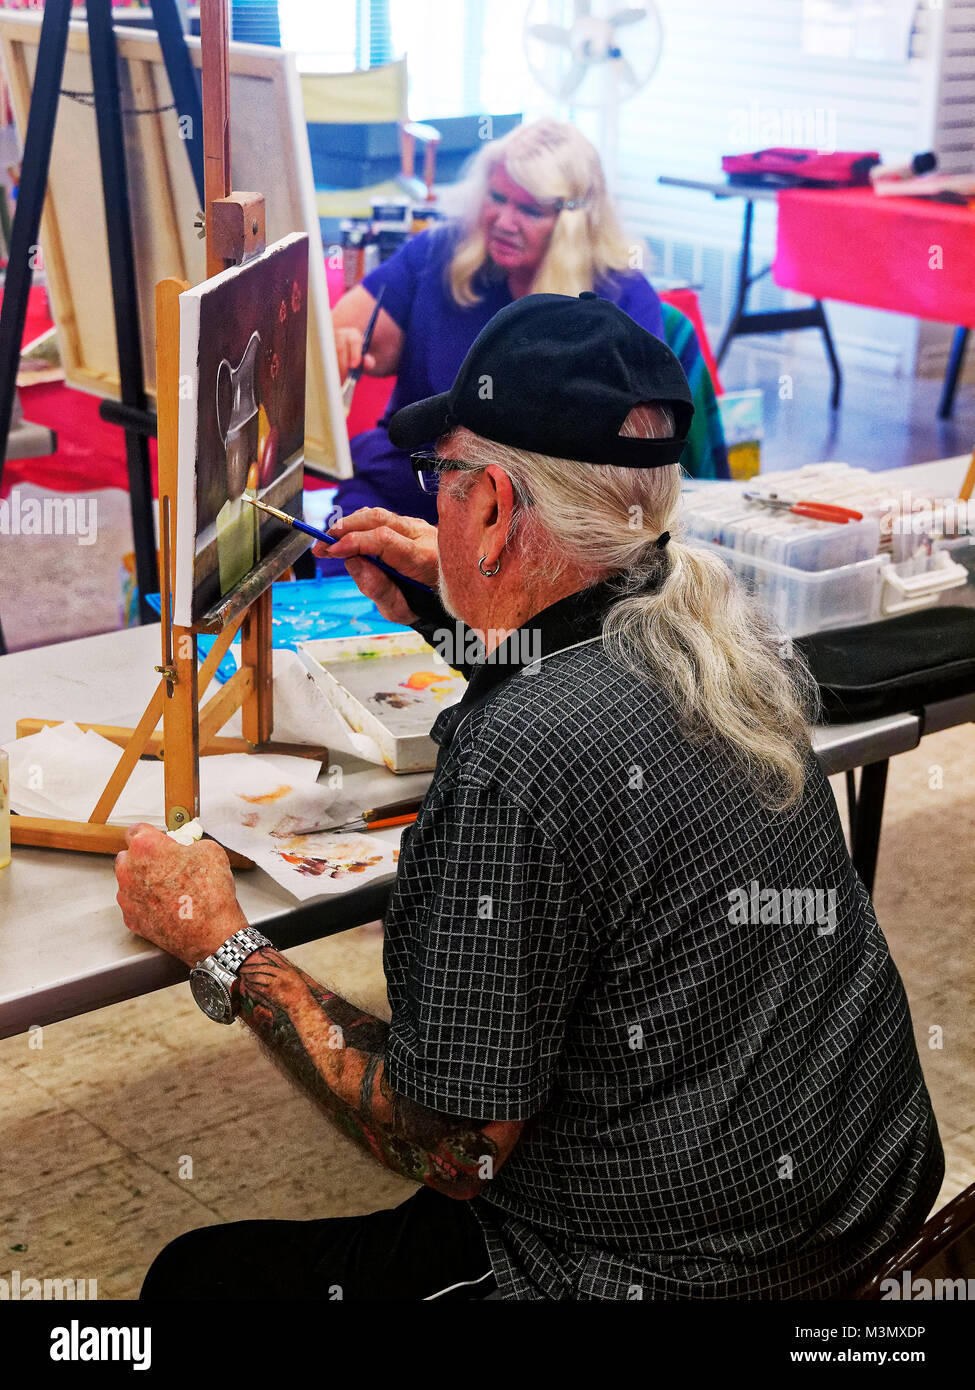 Seniors having lived a long hard life still stay active expressing themselves in painting class, and instructor Mahto Hogue with brace on wrist instructs by working on one of their paintings Stock Photo